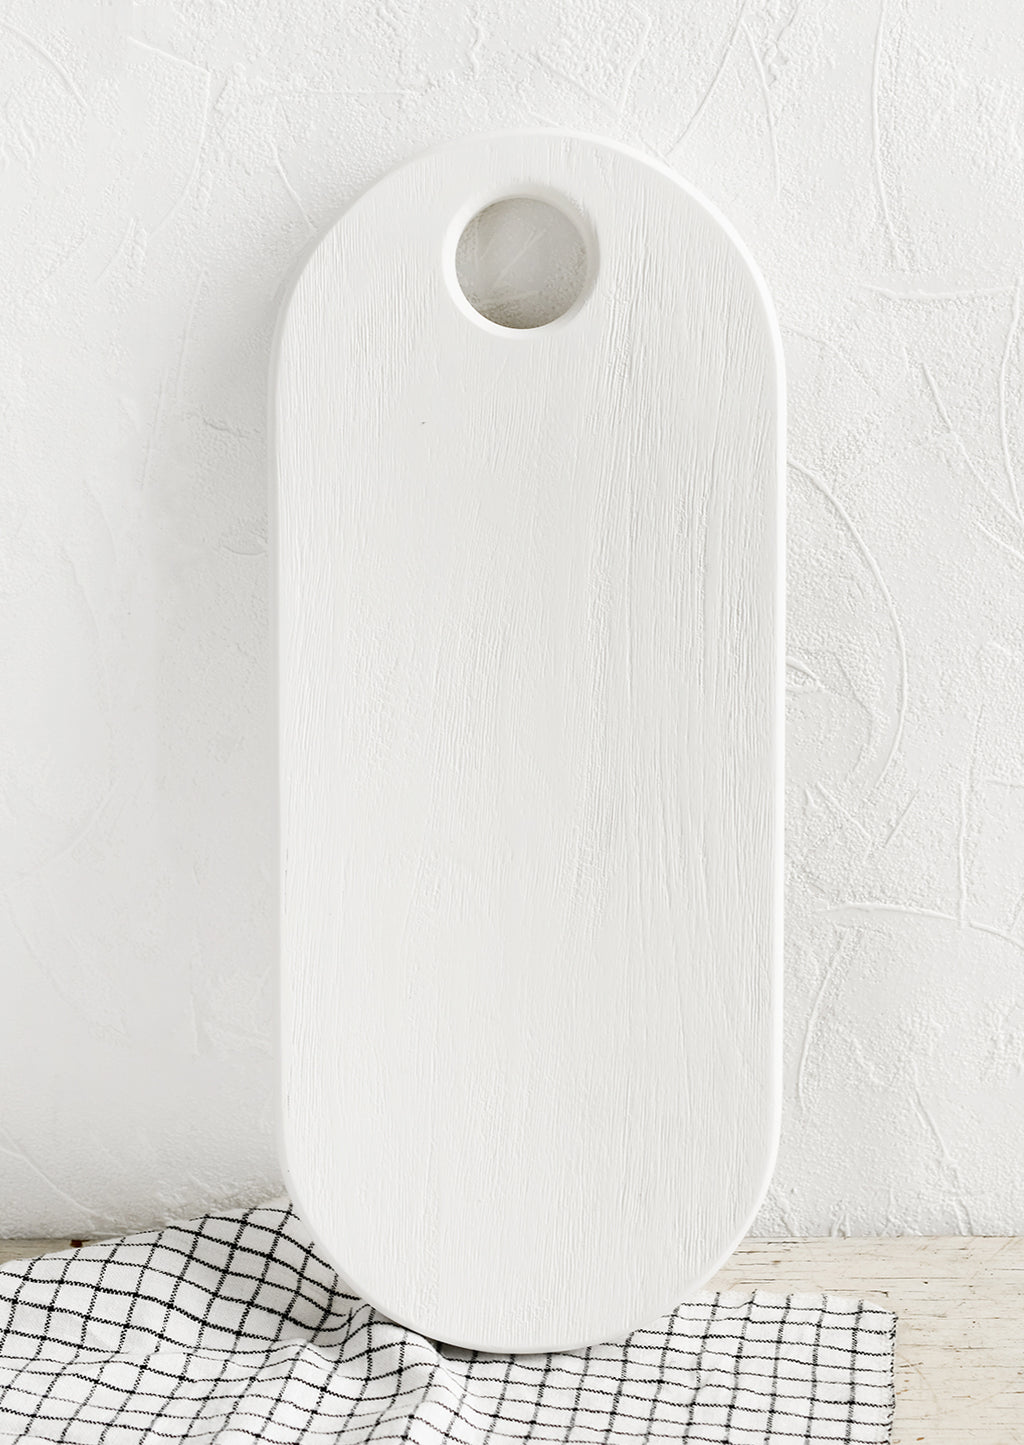 2: A long oval shaped wooden board with white wood finish.